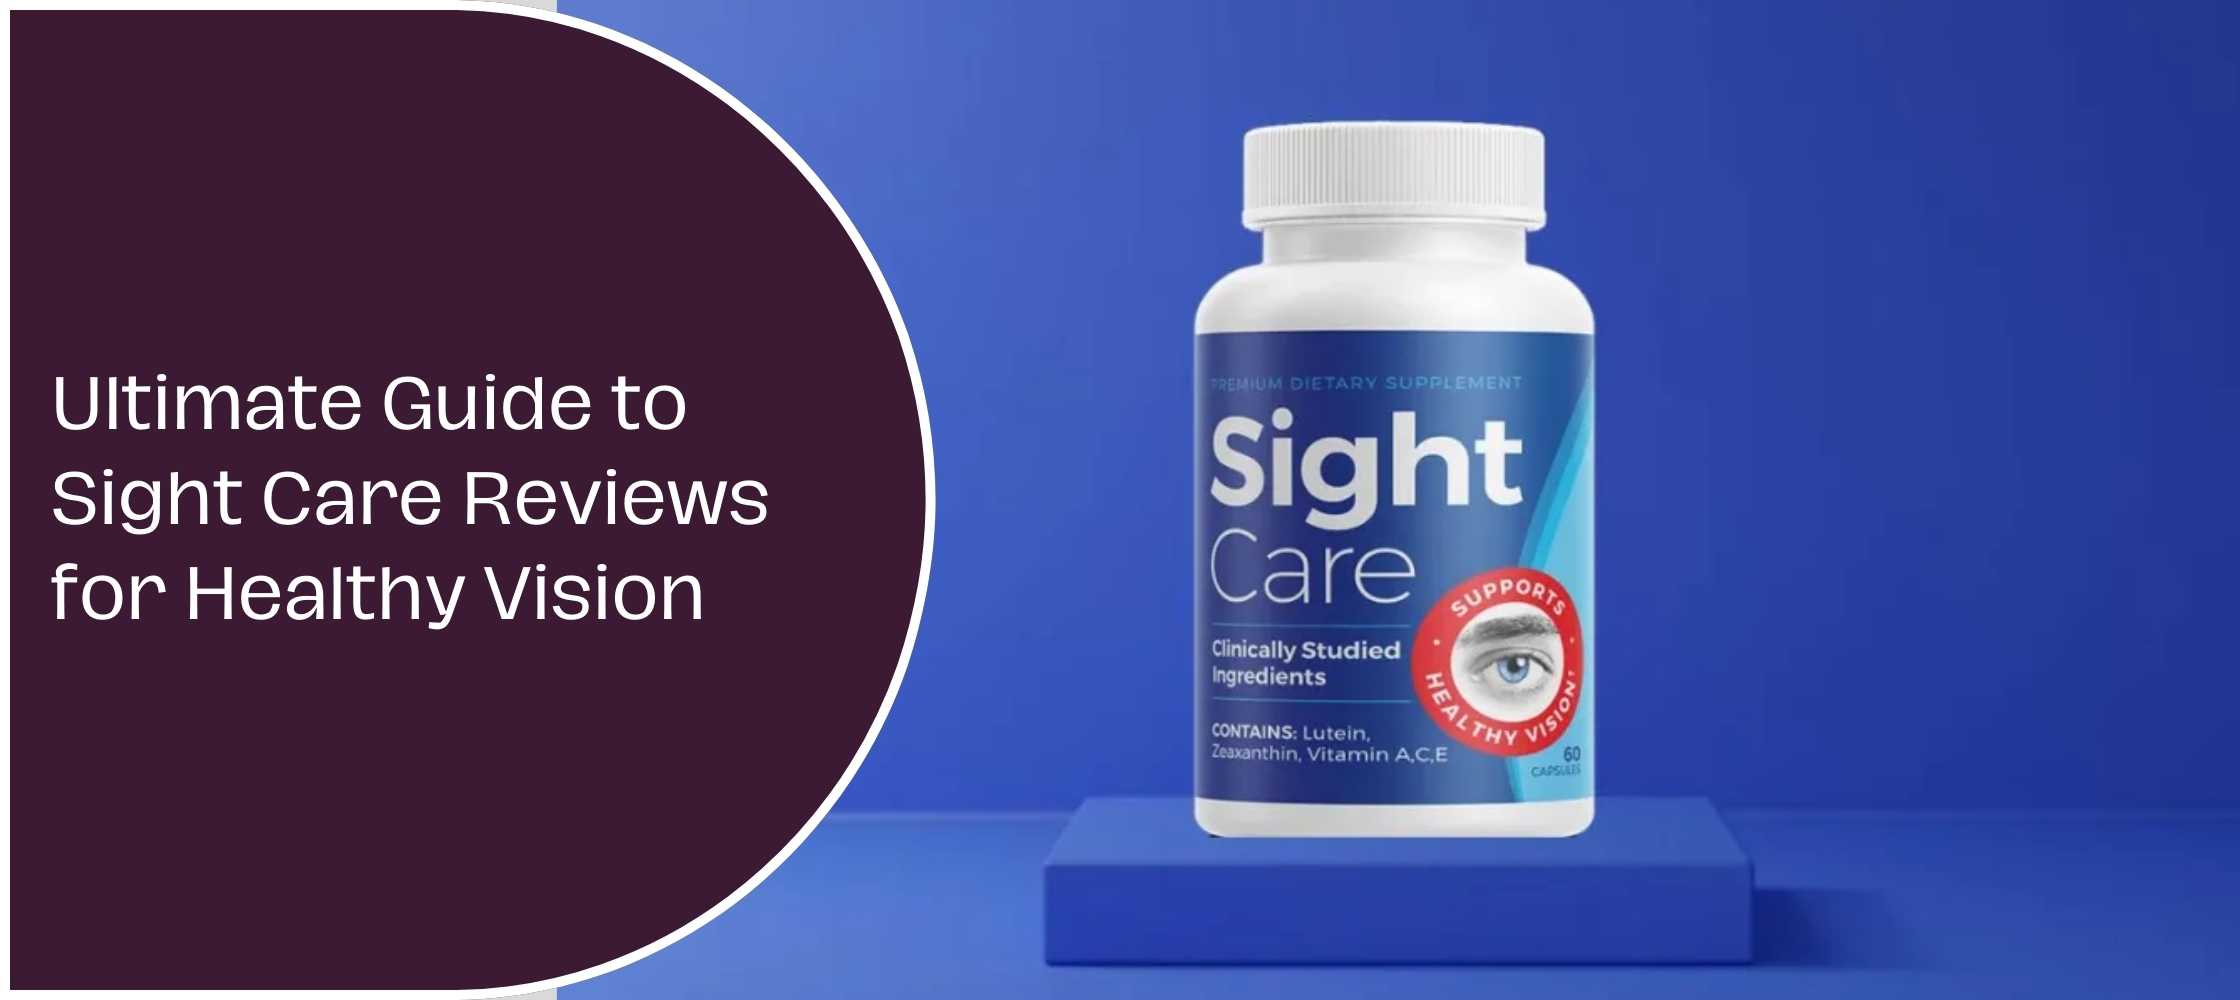 Ultimate Guide to Sight Care Reviews for Healthy Vision